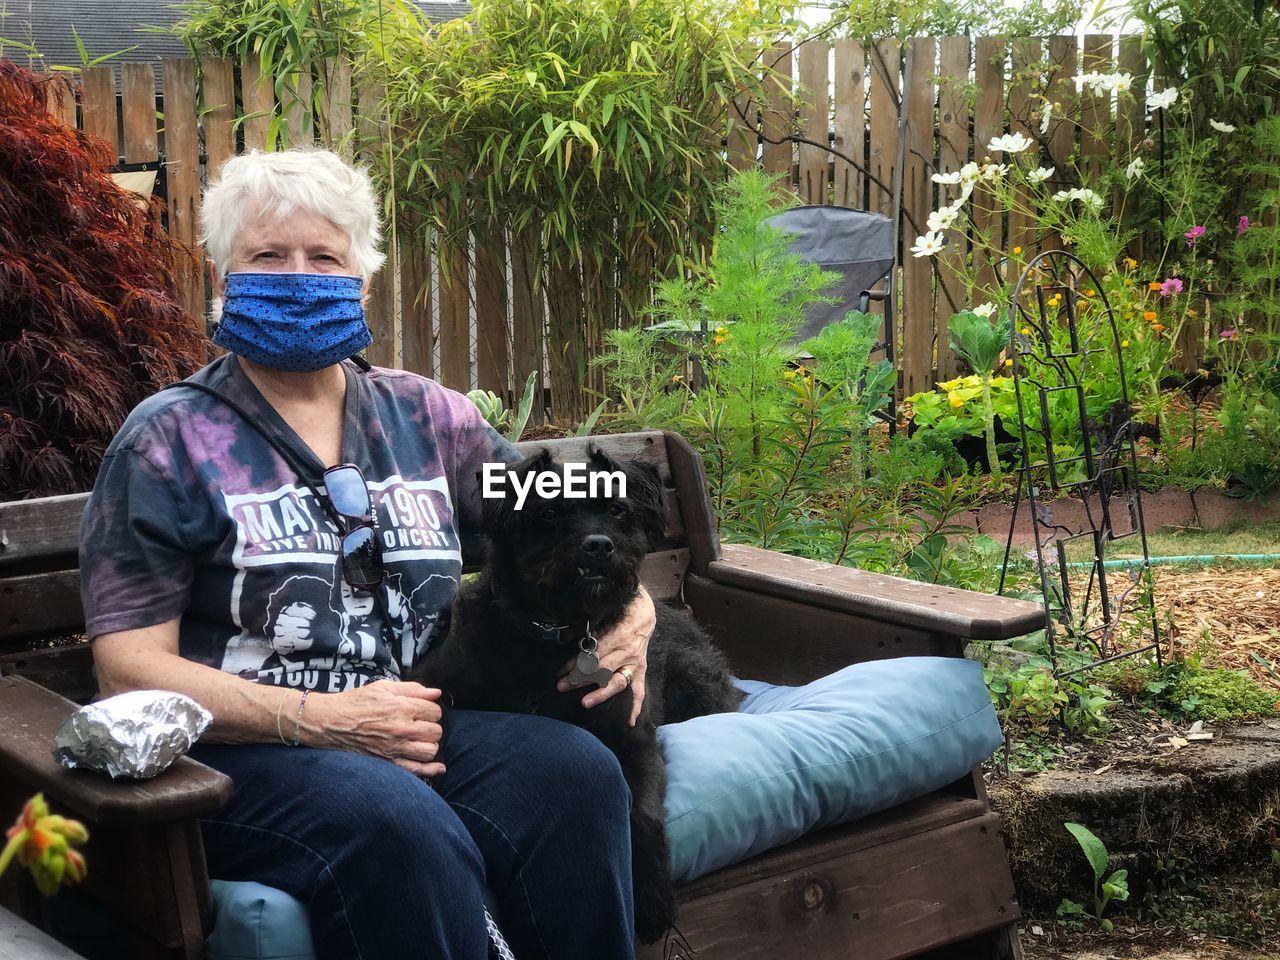 Woman wearing mask sitting with dog at bench